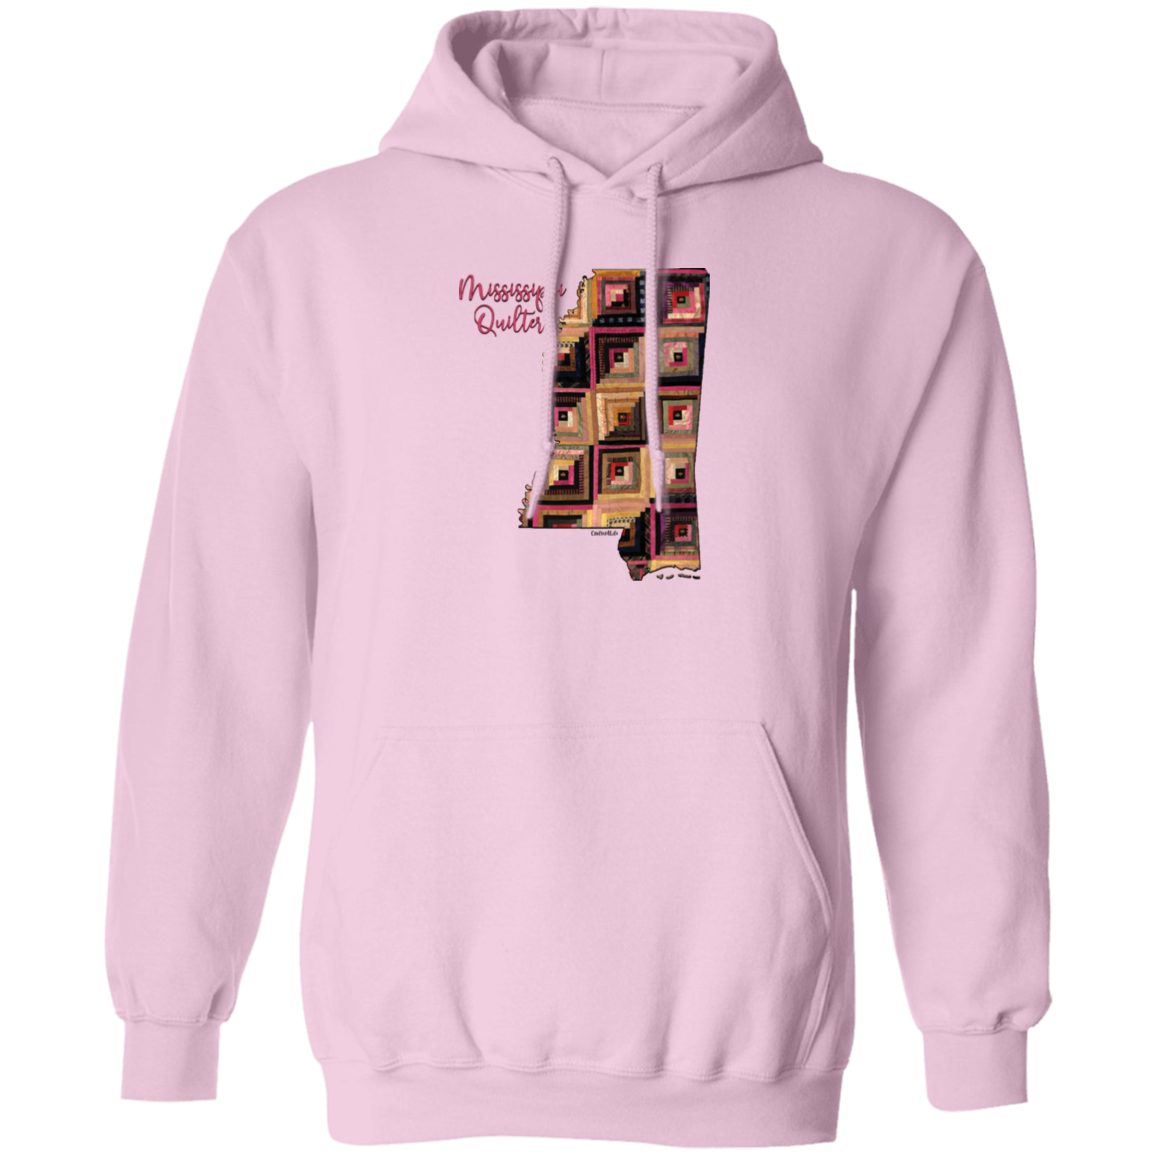 Mississippi Quilter Pullover Hoodie, Gift for Quilting Friends and Family